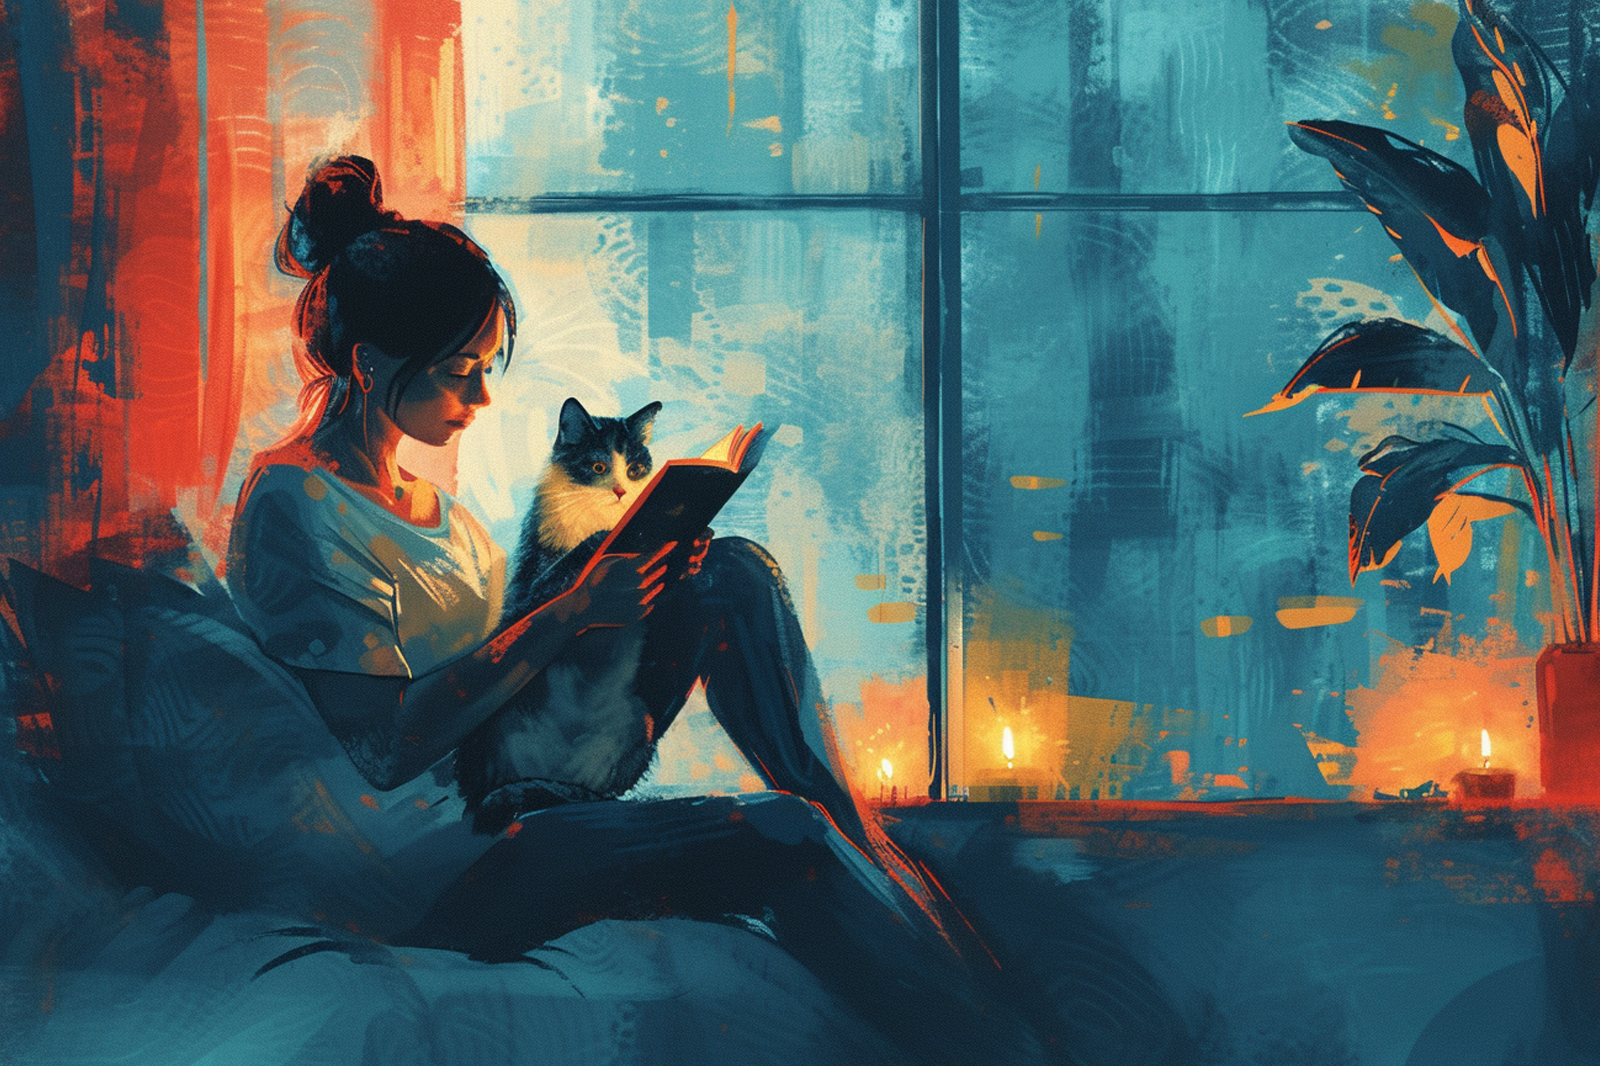 A woman engrossed in a book, accompanied by her cozy cat, in a softly lit room with candles